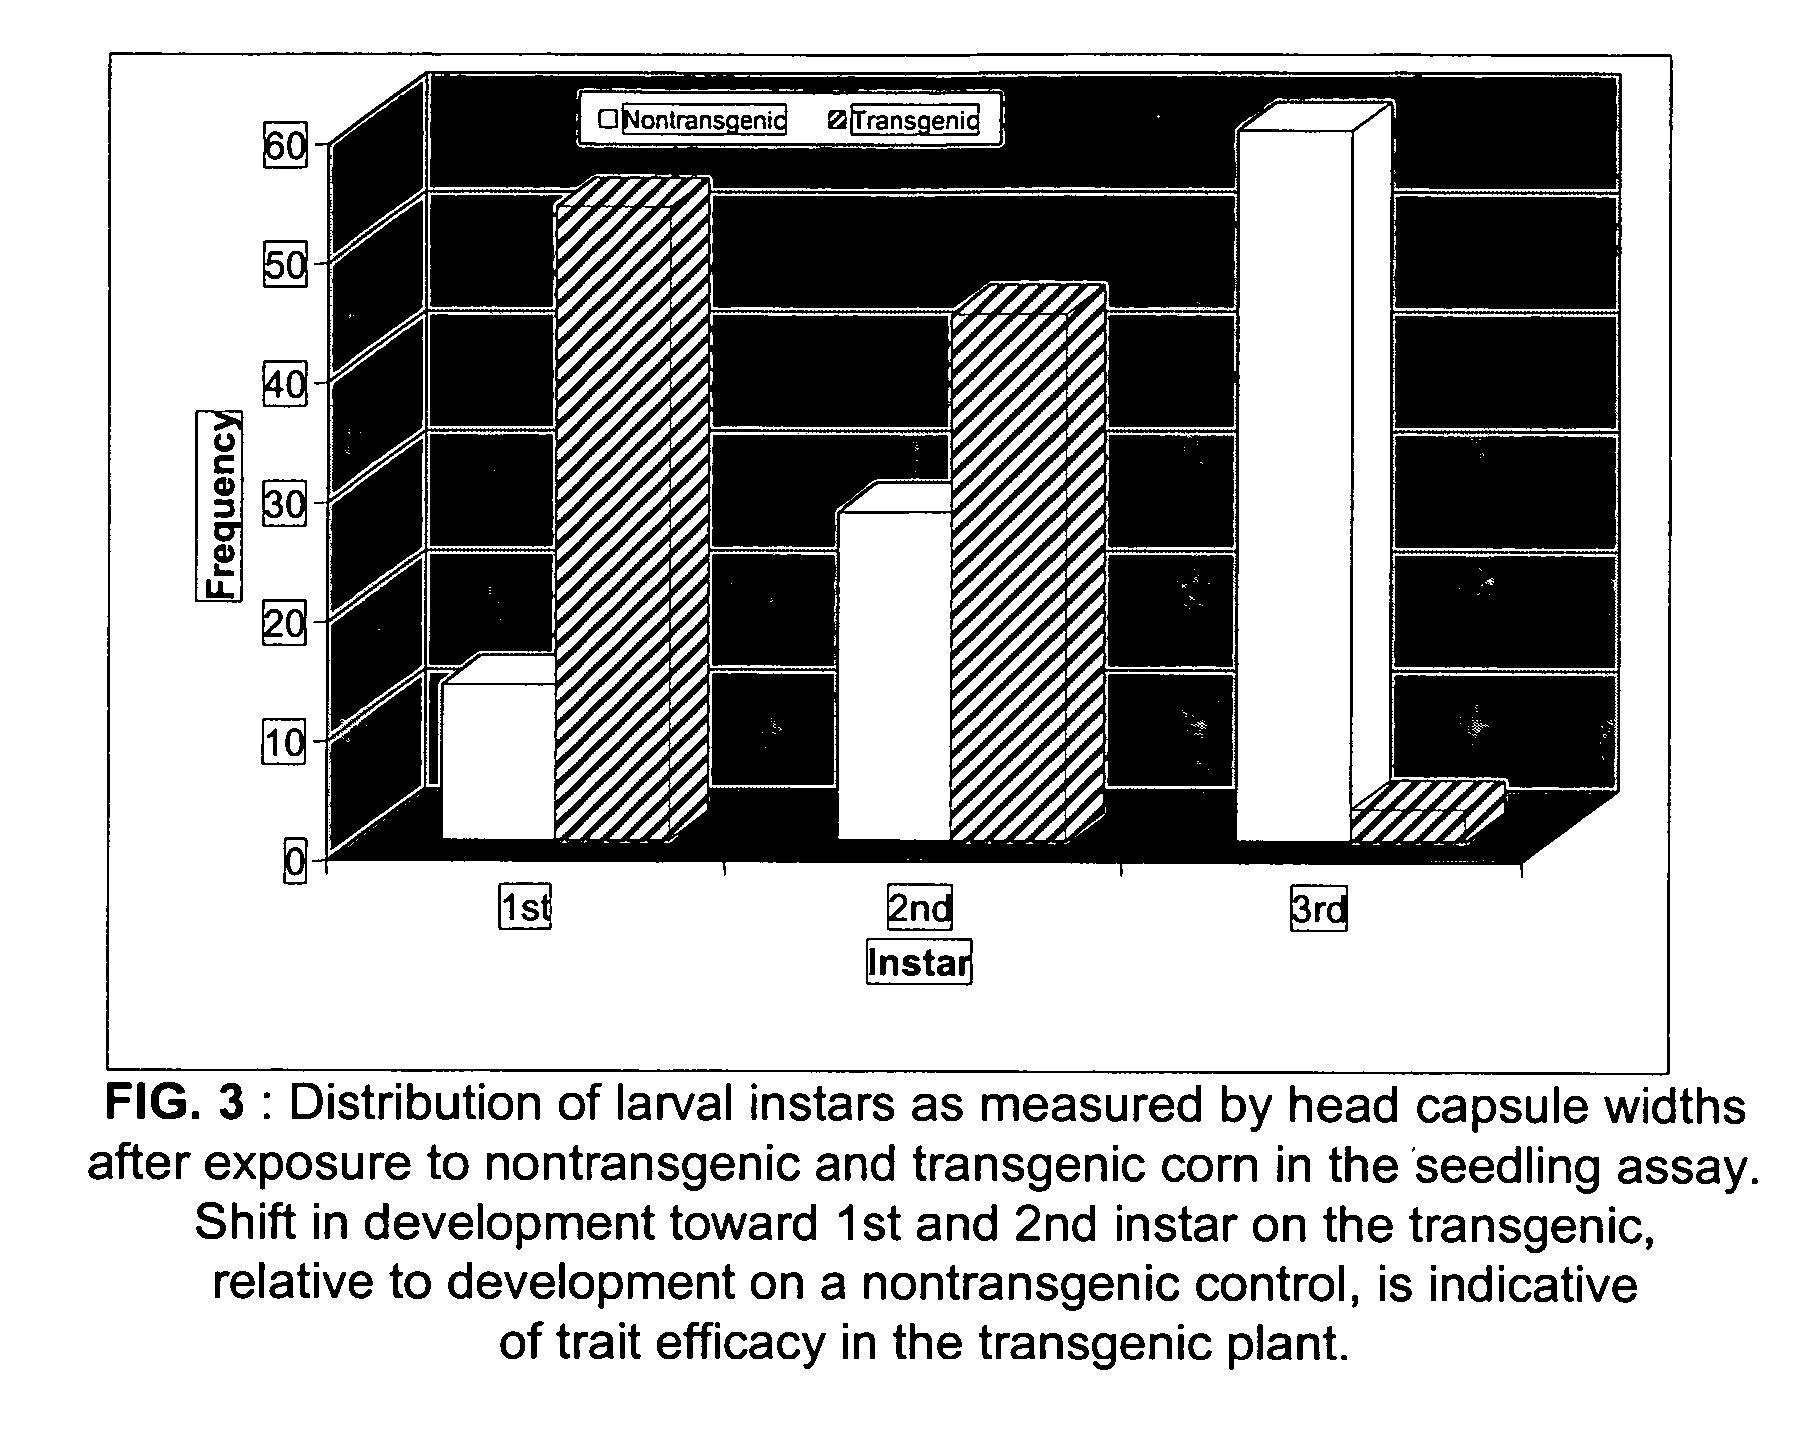 Method of evaluating plant protection